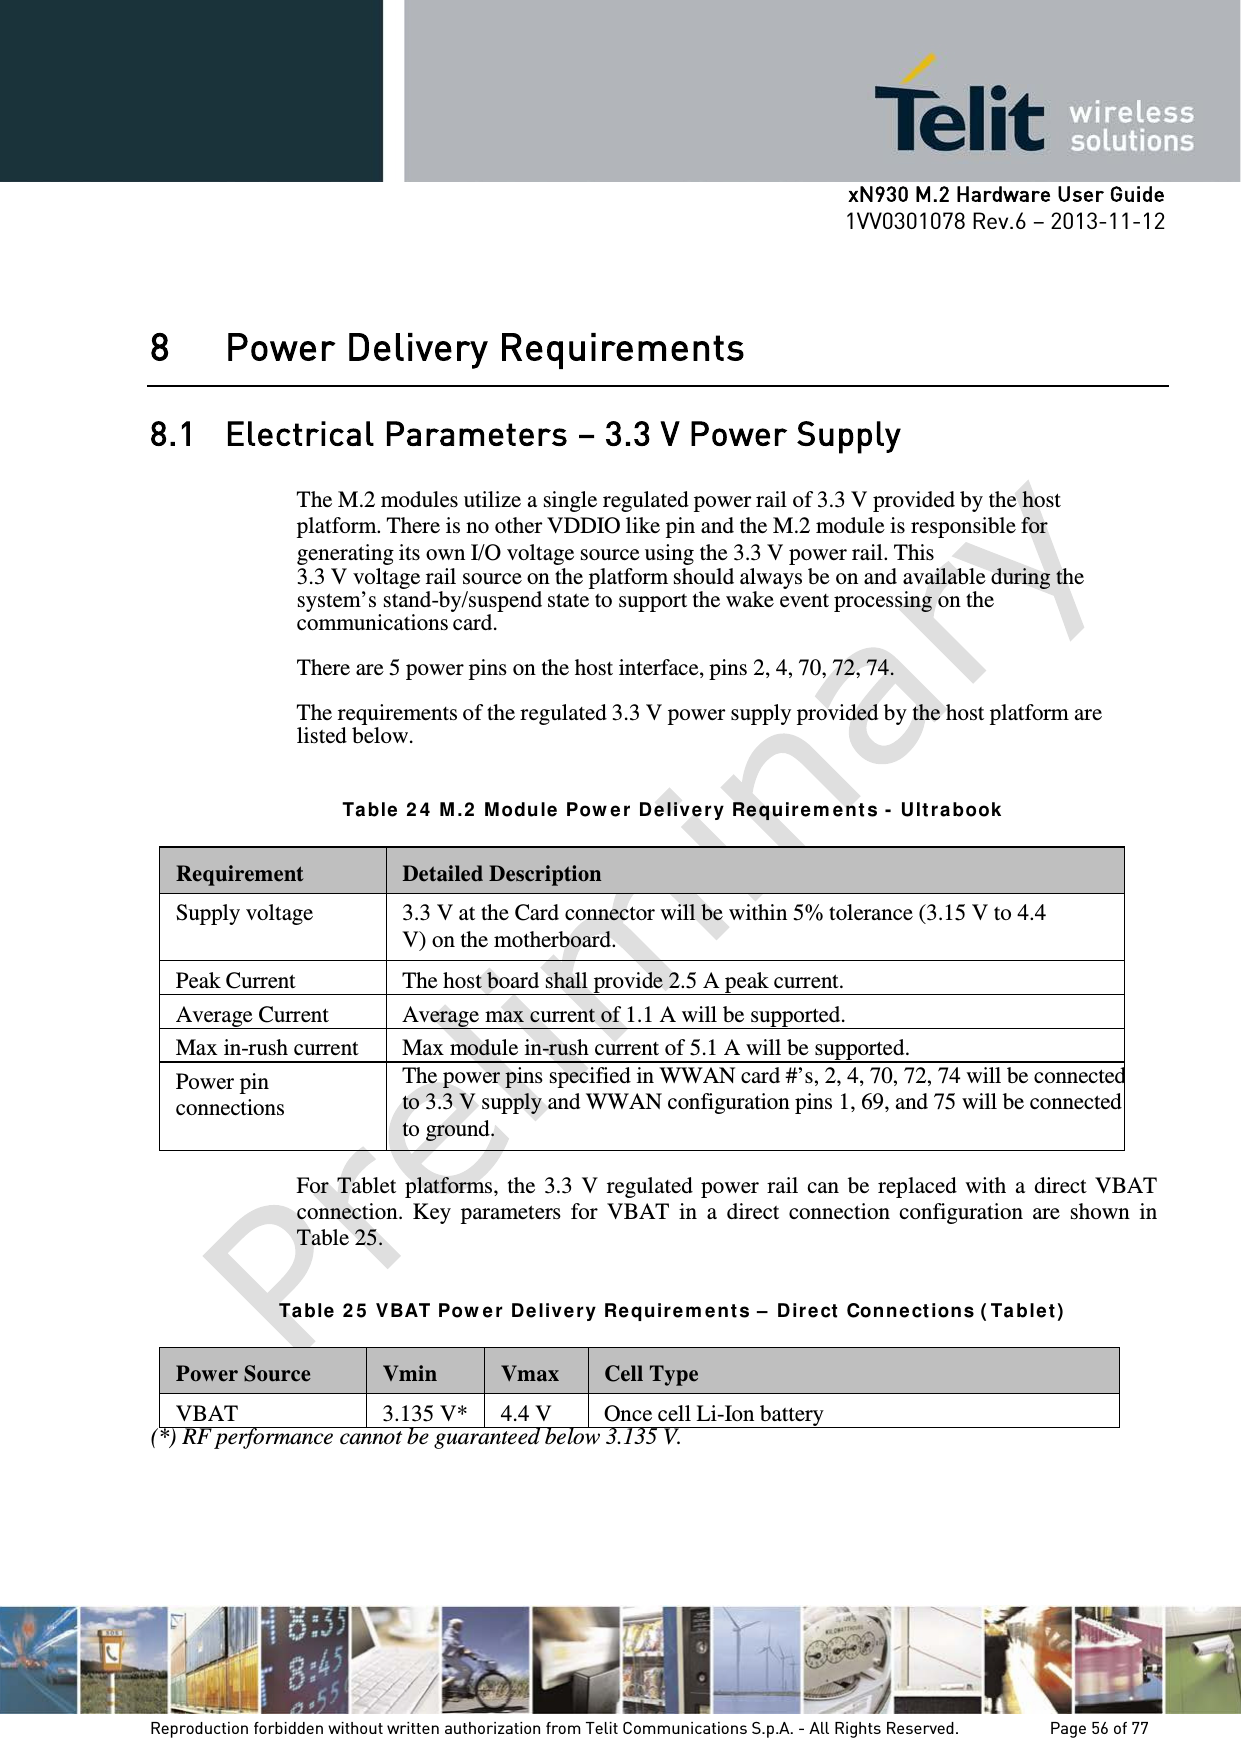      xN930 M.2 Hardware User Guide 1VV0301078 Rev.6 – 2013-11-12    8 Power Delivery Requirements 8.1 Electrical Parameters – 3.3 V Power Supply  The M.2 modules utilize a single regulated power rail of 3.3 V provided by the host platform. There is no other VDDIO like pin and the M.2 module is responsible for generating its own I/O voltage source using the 3.3 V power rail. This 3.3 V voltage rail source on the platform should always be on and available during the system’s stand-by/suspend state to support the wake event processing on the communications card.  There are 5 power pins on the host interface, pins 2, 4, 70, 72, 74.  The requirements of the regulated 3.3 V power supply provided by the host platform are listed below.   Ta ble  2 4  M.2  M odu le  Pow er Delivery Requir e m ent s -  Ult ra book   Requirement  Detailed Description Supply voltage  3.3 V at the Card connector will be within 5% tolerance (3.15 V to 4.4 V) on the motherboard. Peak Current The host board shall provide 2.5 A peak current. Average Current Average max current of 1.1 A will be supported. Max in-rush current Max module in-rush current of 5.1 A will be supported. Power pin connections The power pins specified in WWAN card #’s, 2, 4, 70, 72, 74 will be connected to 3.3 V supply and WWAN configuration pins 1, 69, and 75 will be connected to ground.   For Tablet  platforms, the 3.3 V regulated power  rail  can be  replaced with a  direct VBAT connection.  Key  parameters for  VBAT  in  a  direct  connection  configuration  are  shown  in Table 25.   Ta ble  2 5  VBAT Pow e r  Delivery Re quir e m ent s –  Dir e ct  Conne ct ions ( Ta ble t )   Power Source  Vmin  Vmax  Cell Type VBAT 3.135 V* 4.4 V Once cell Li-Ion battery (*) RF performance cannot be guaranteed below 3.135 V.   Reproduction forbidden without written authorization from Telit Communications S.p.A. - All Rights Reserved.    Page 56 of 77 